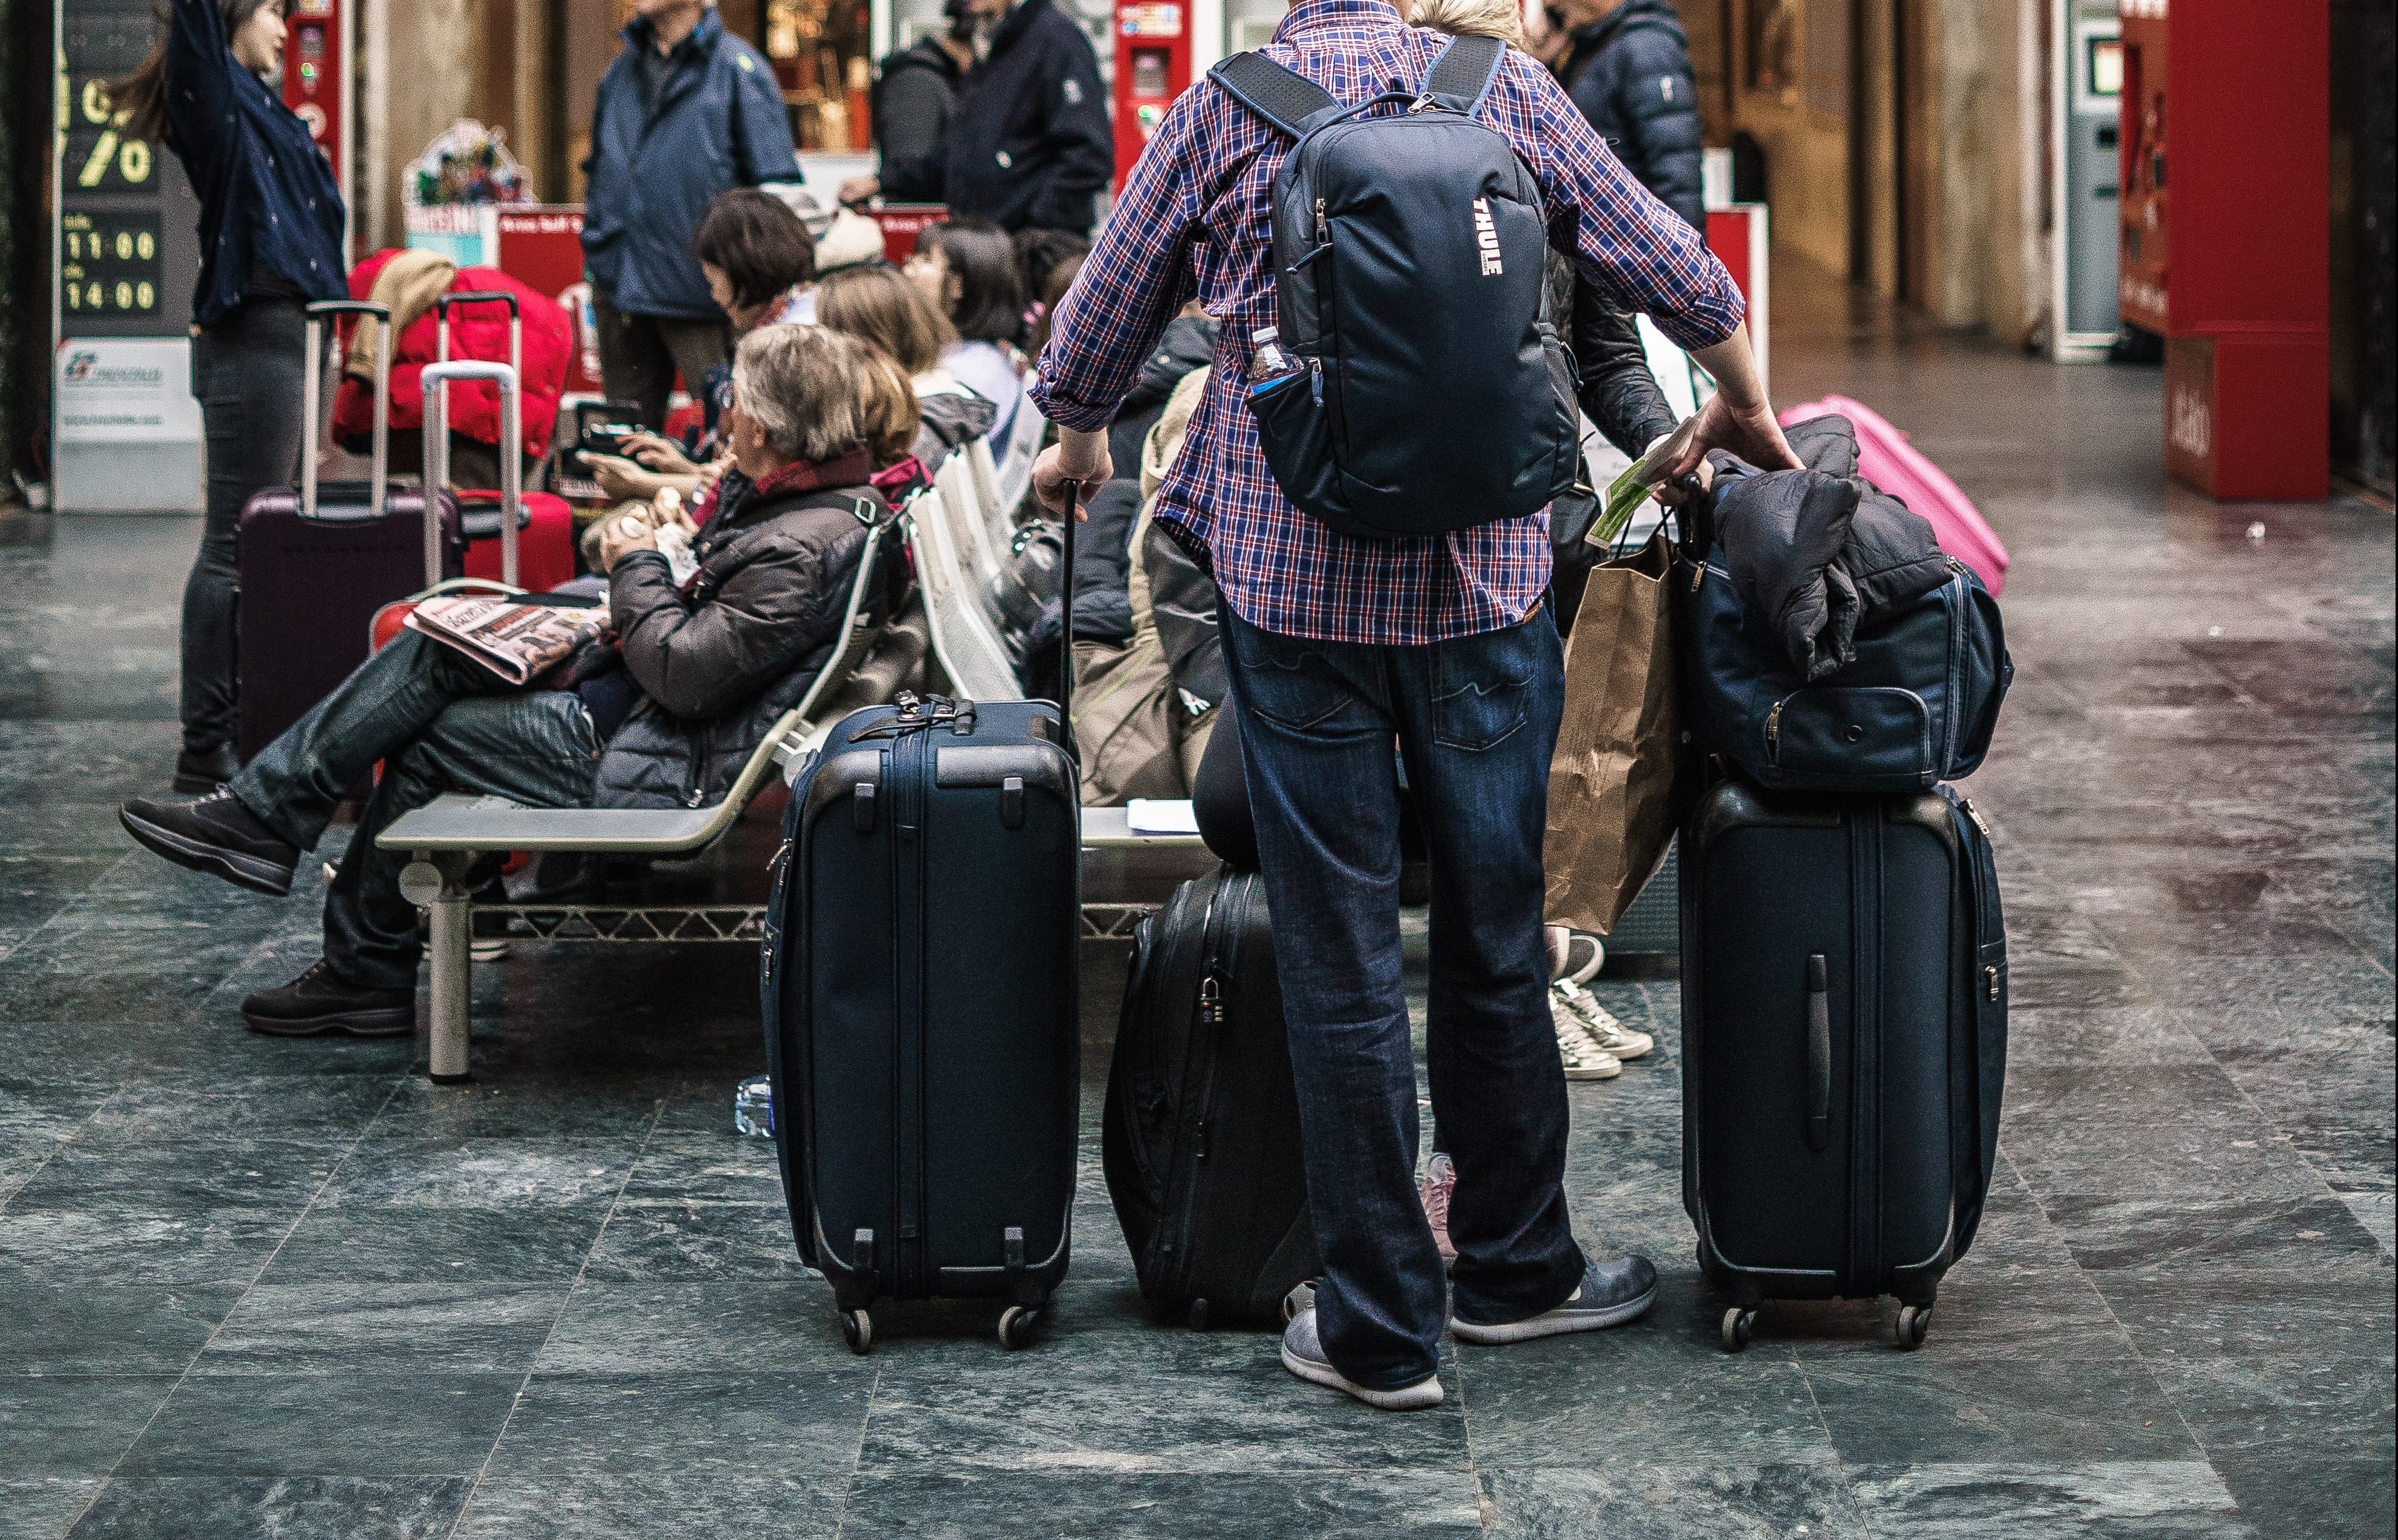 5 Simple Ways You Can Prevent Airline Baggage Fees